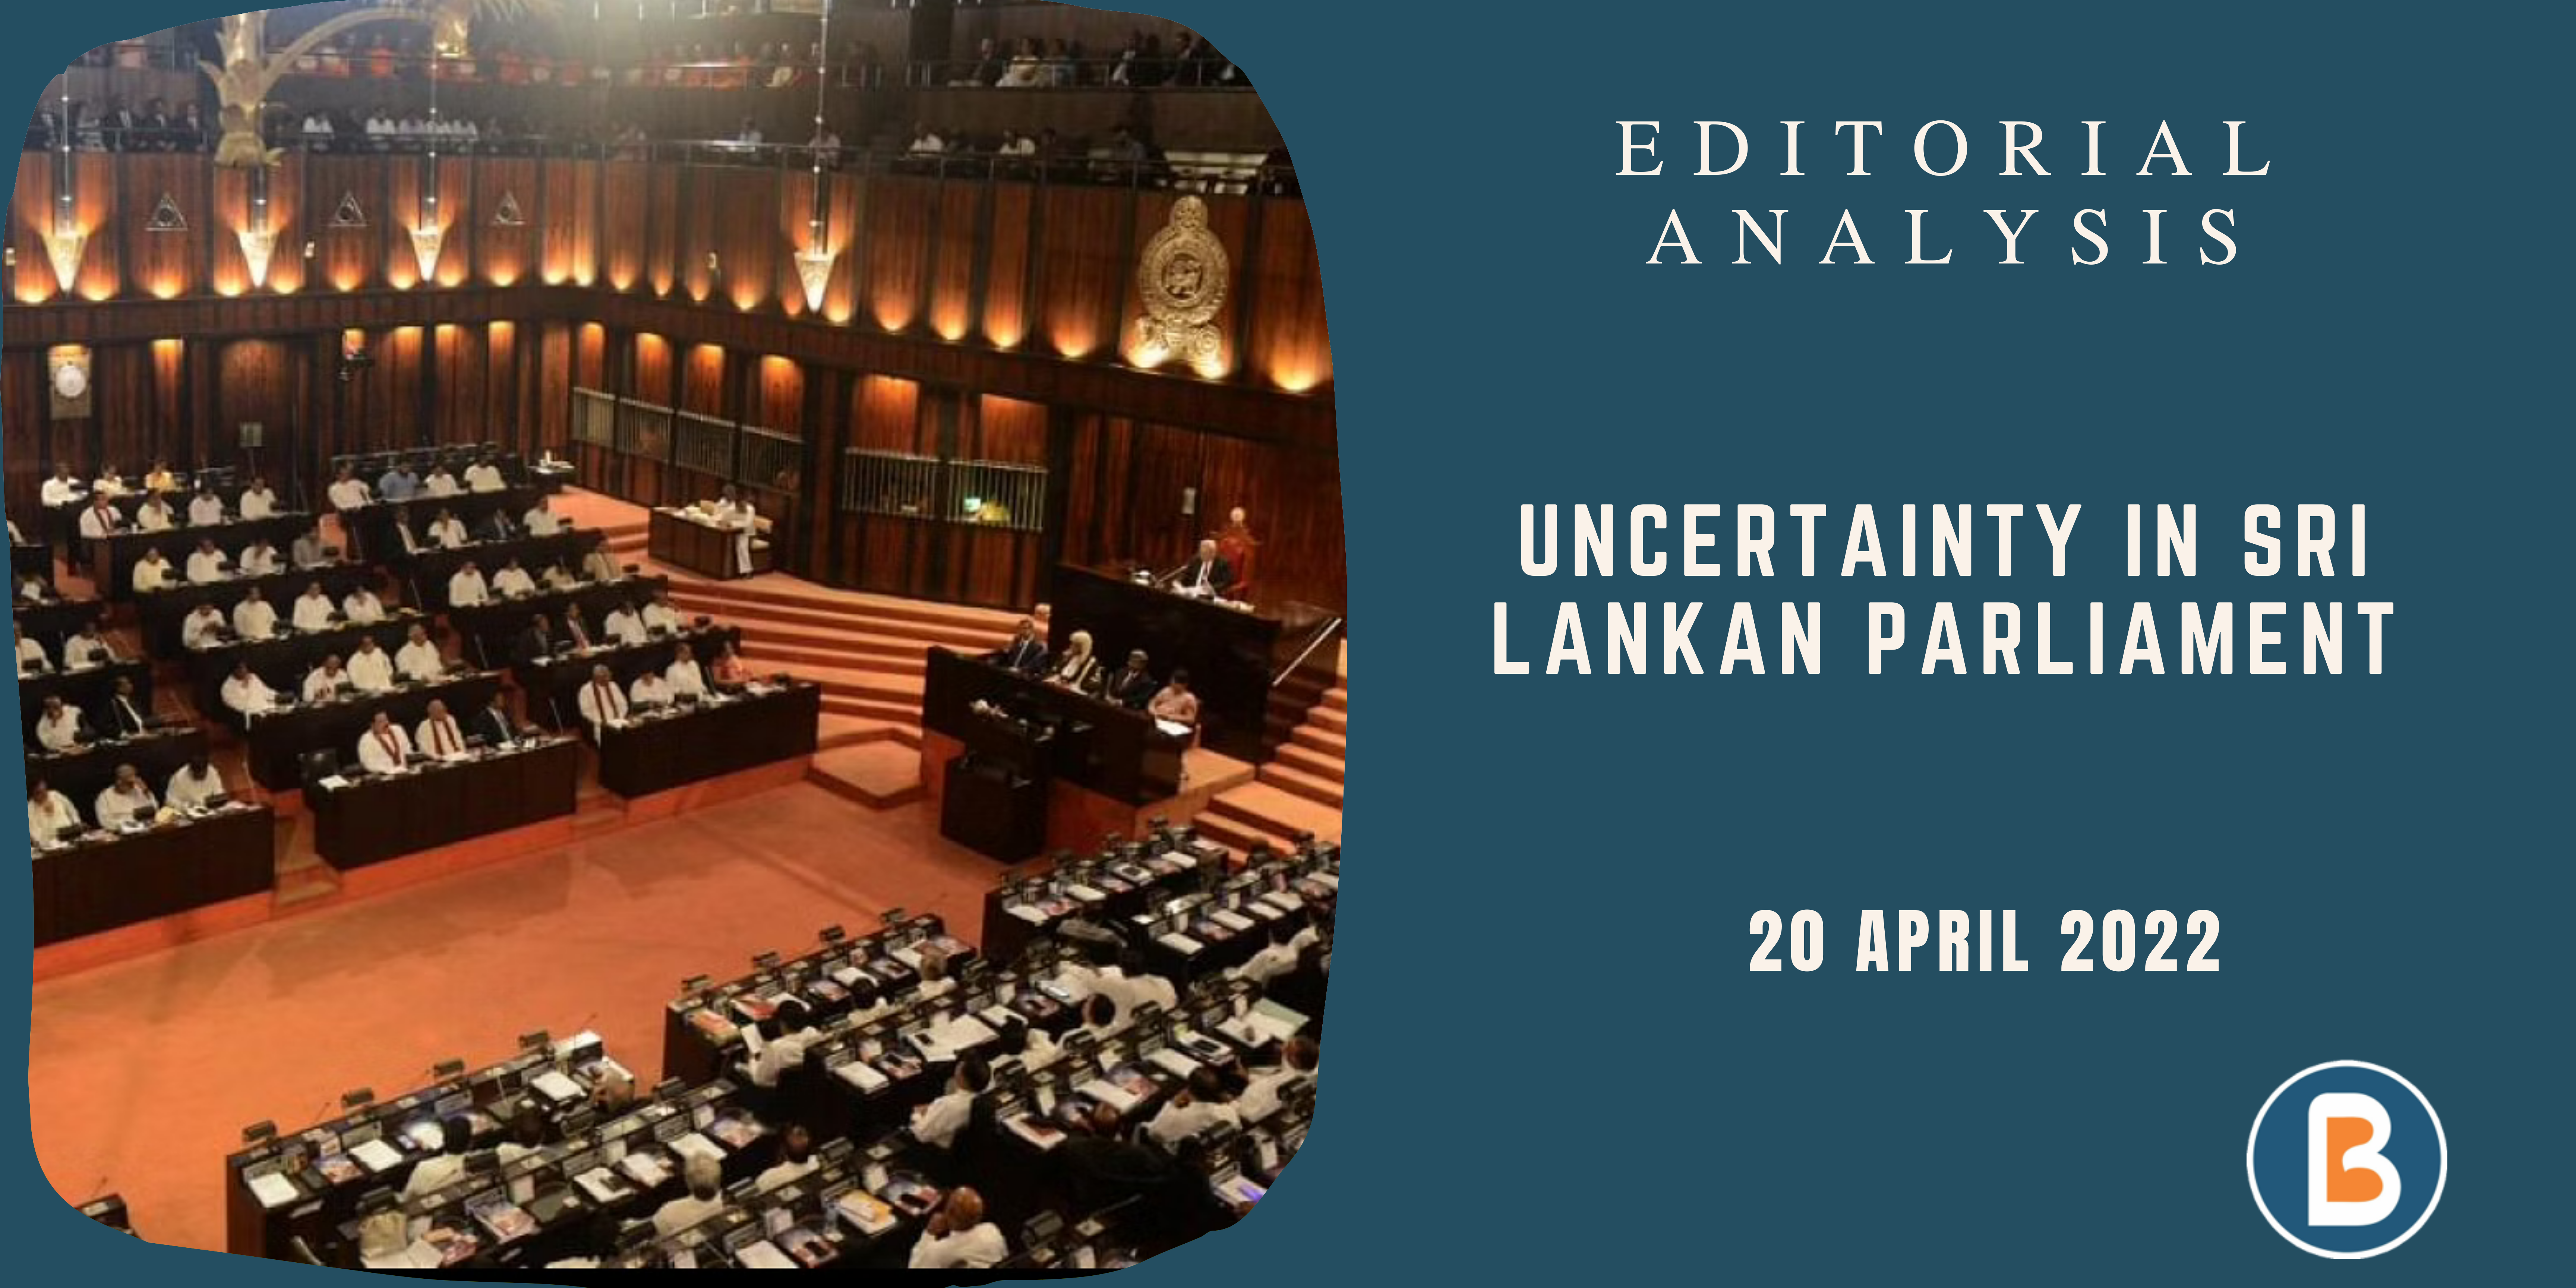 Editorial Analysis for UPSC - Uncertainty in Sri Lankan Parliament